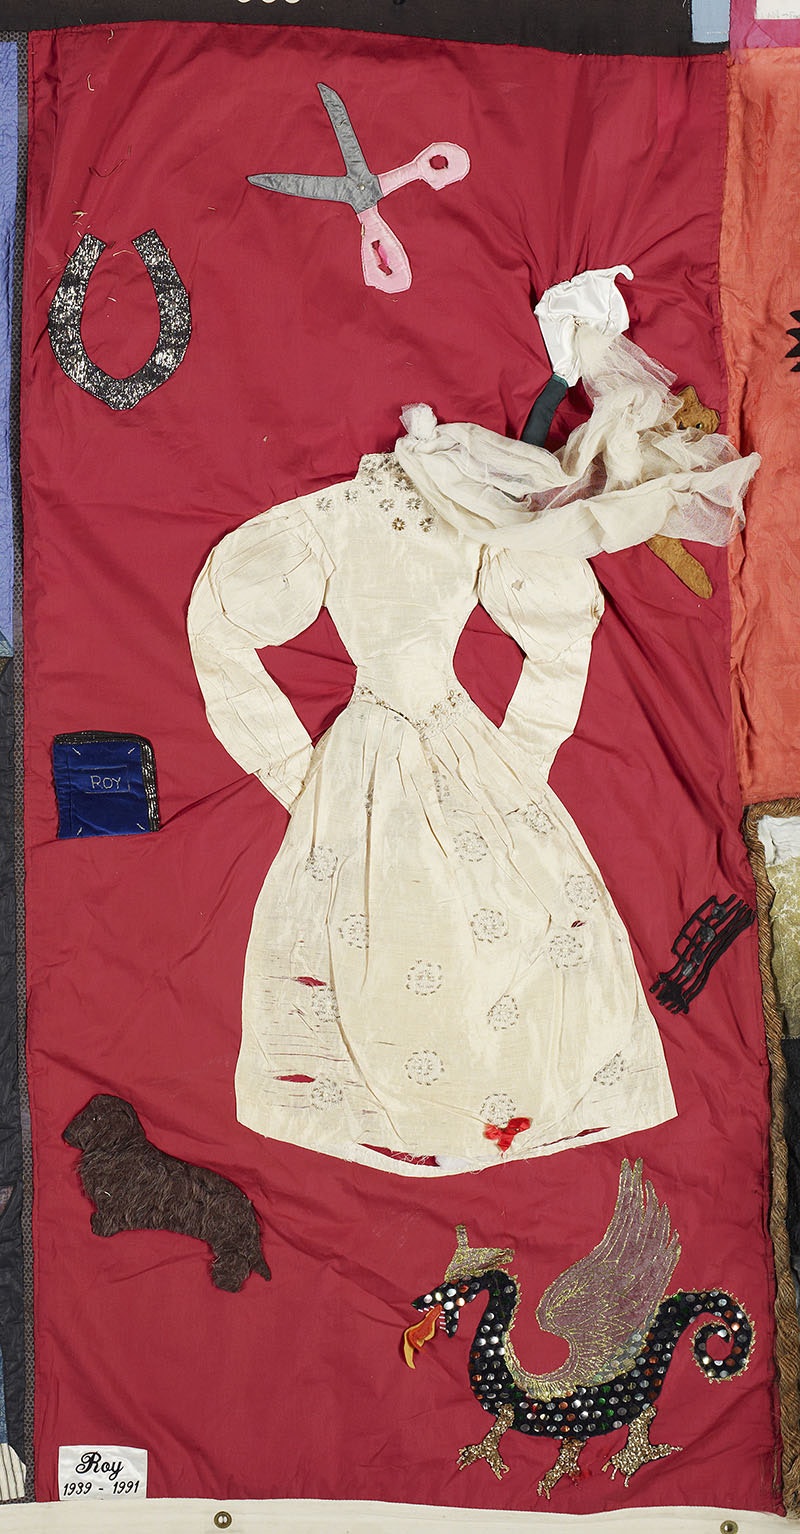 A panel from the NZ Aids Memorial Quilt. It is red with a dress on it and fabric scissors and a horseshoe and dog sown in